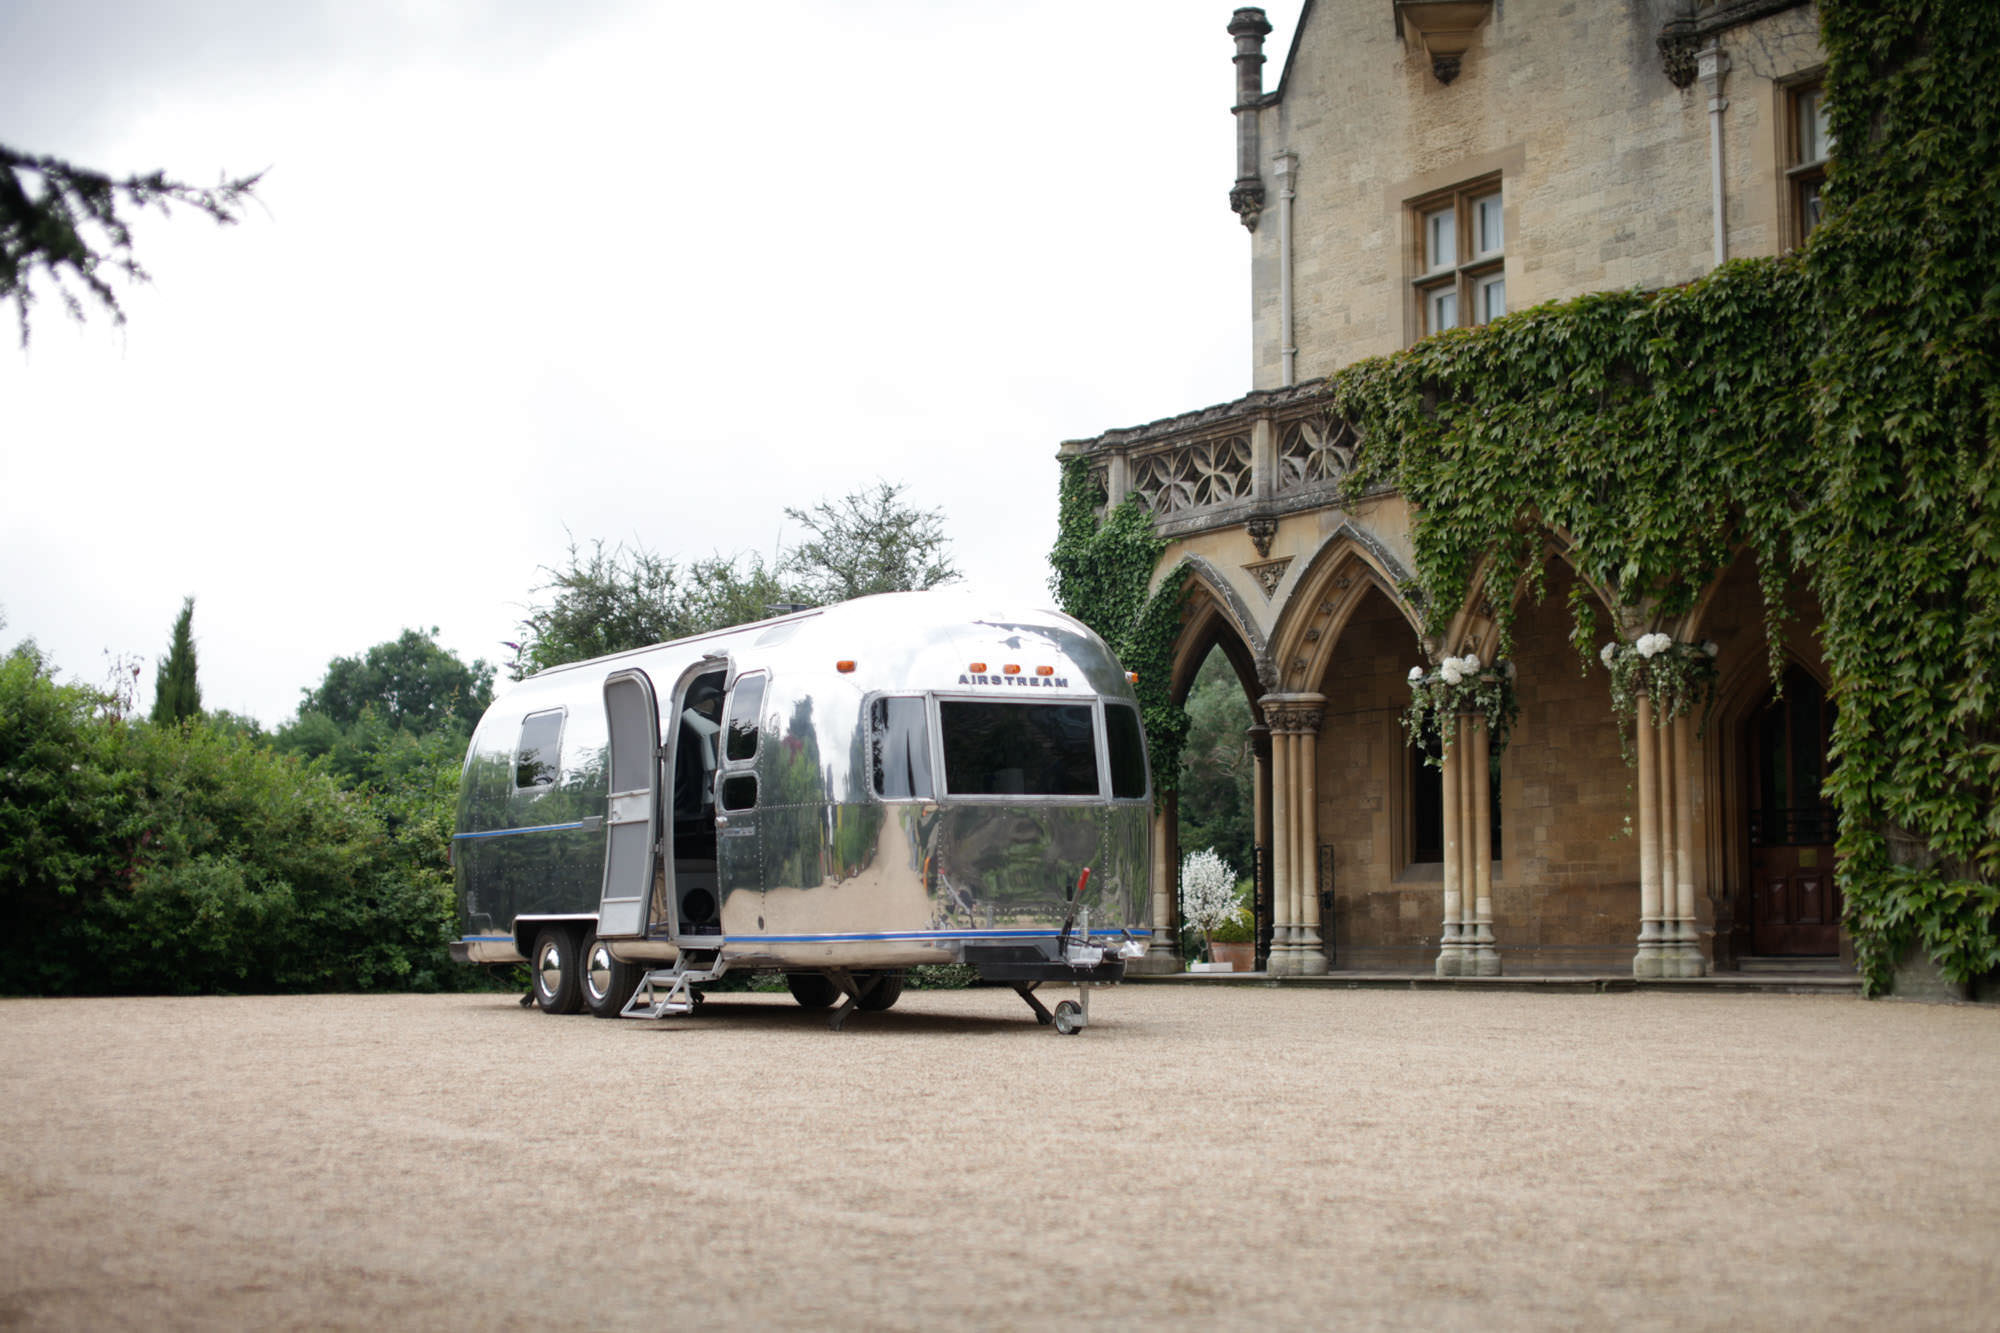 the Mobile Room - Hire a 1974 Airstream for your wedding